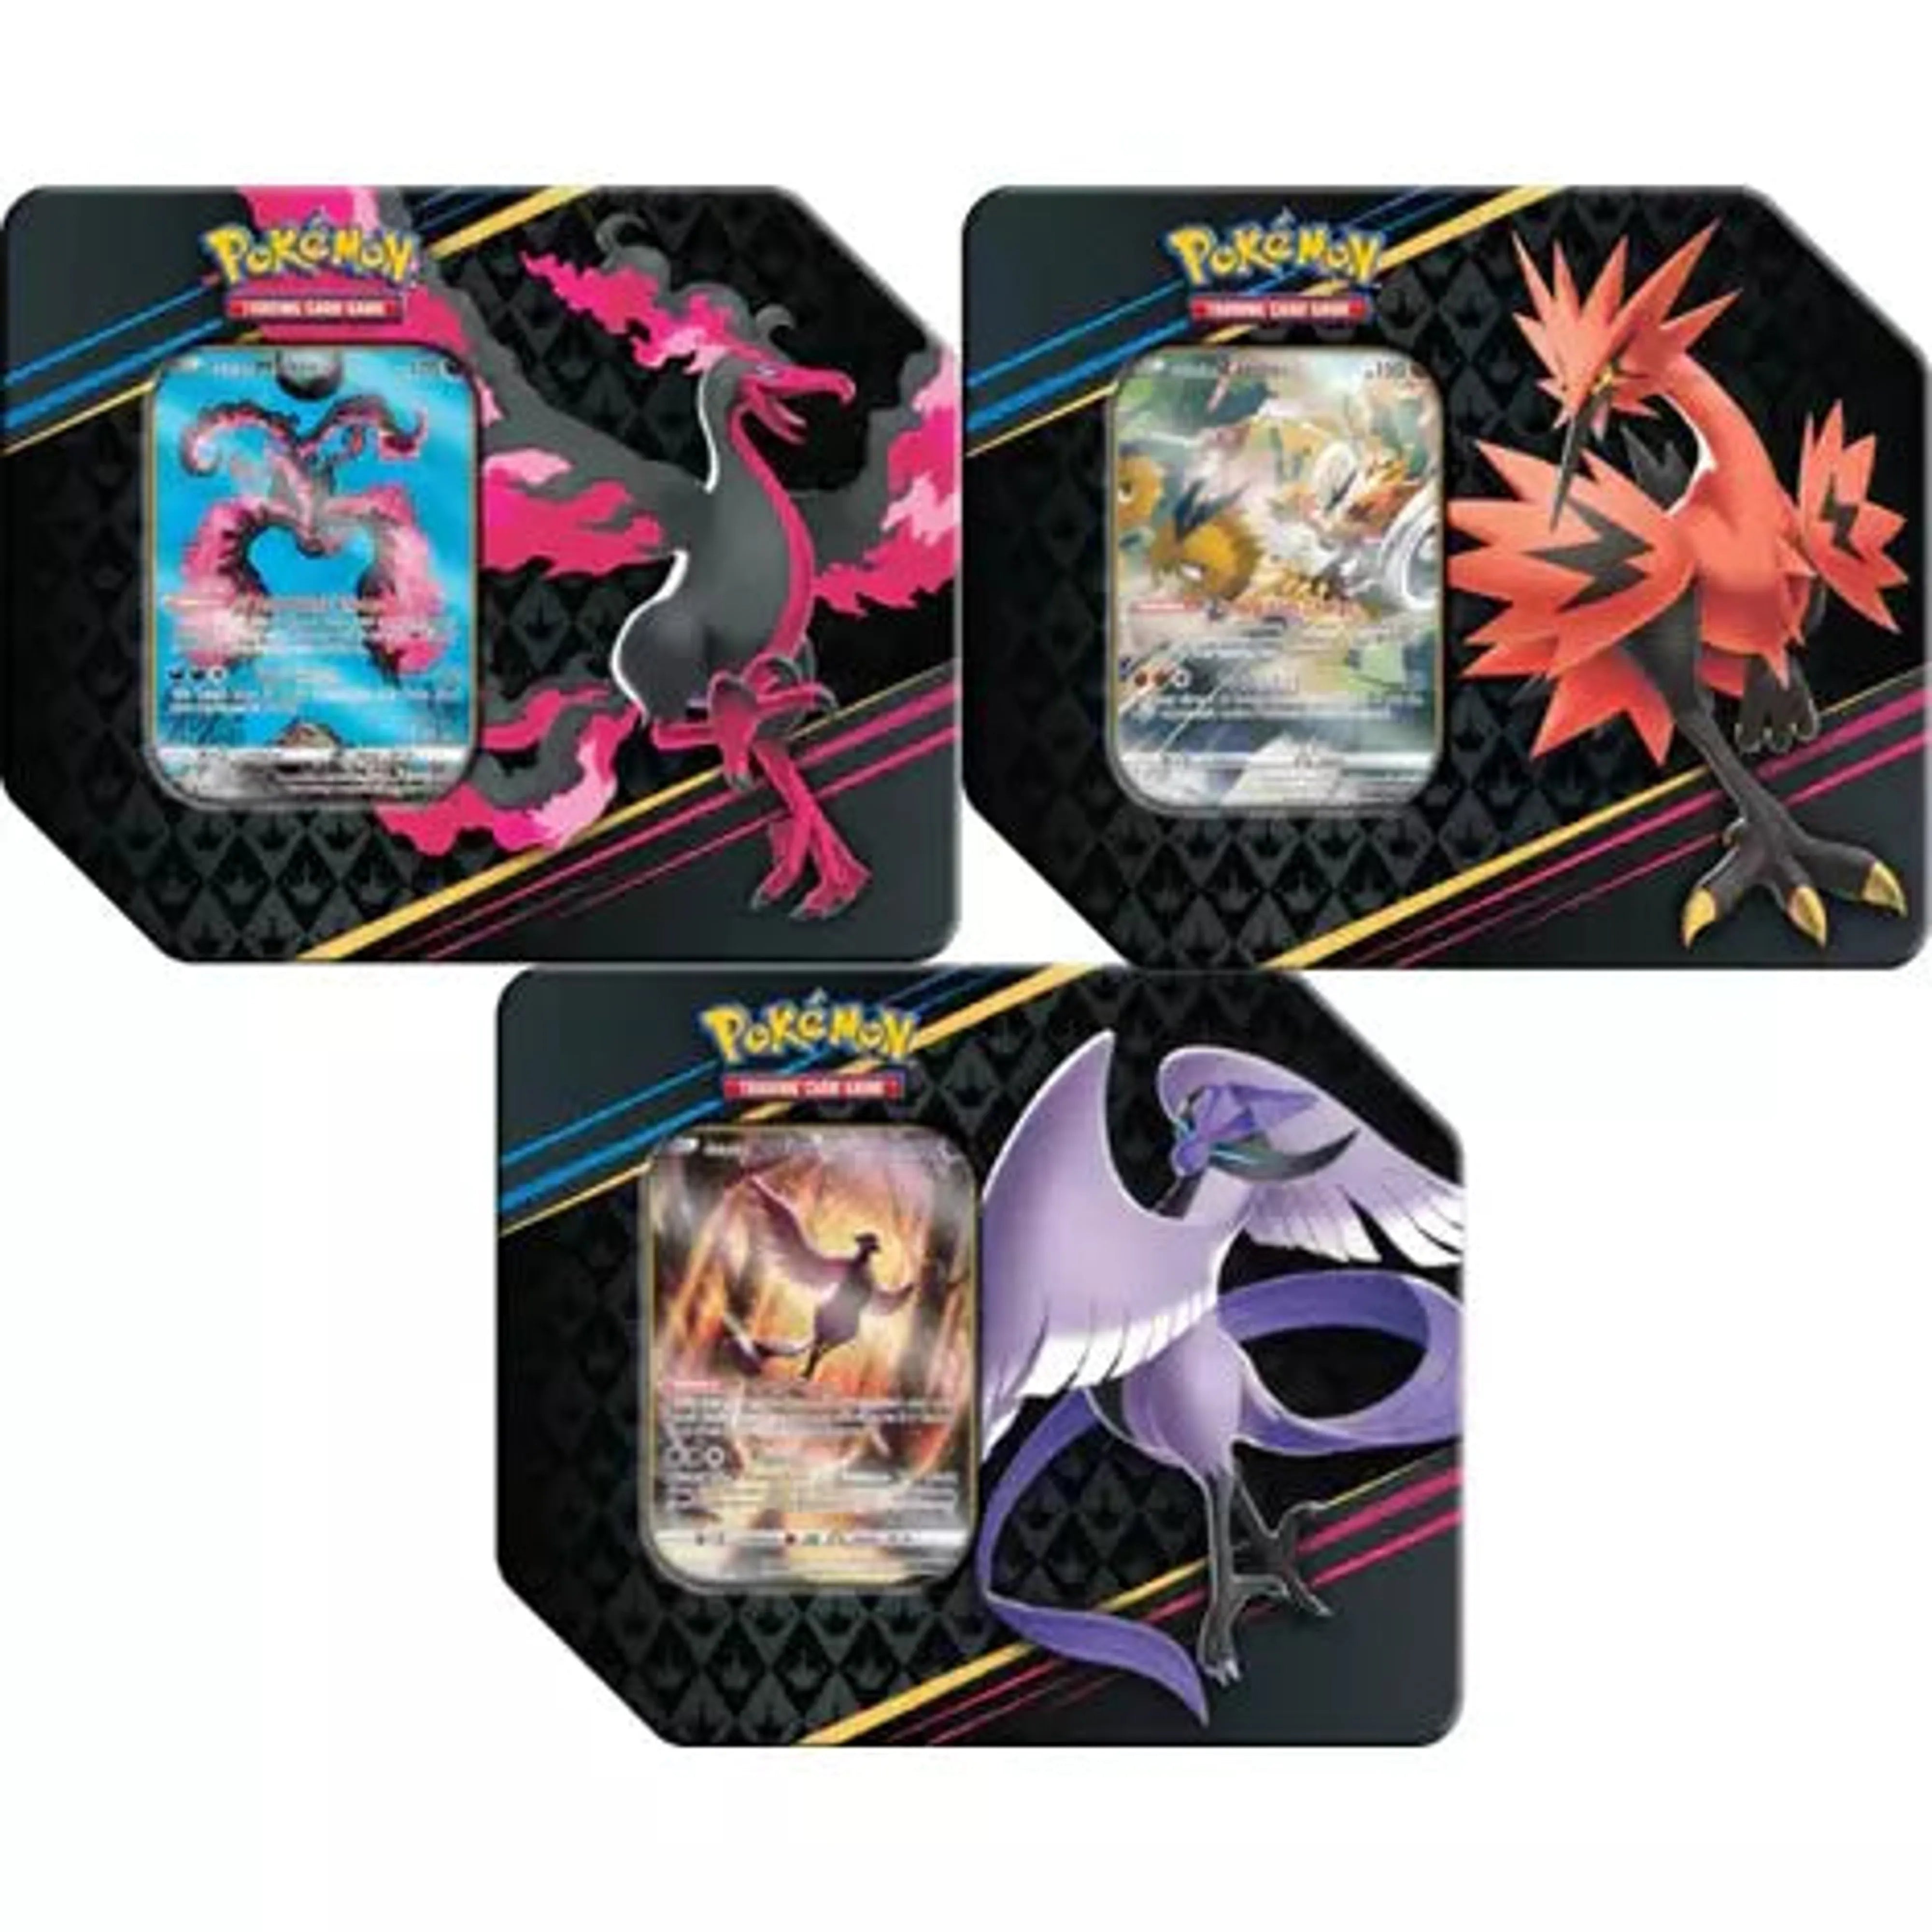 Pokémon Trainer Boxes, Booster Pack Sale for Black Friday